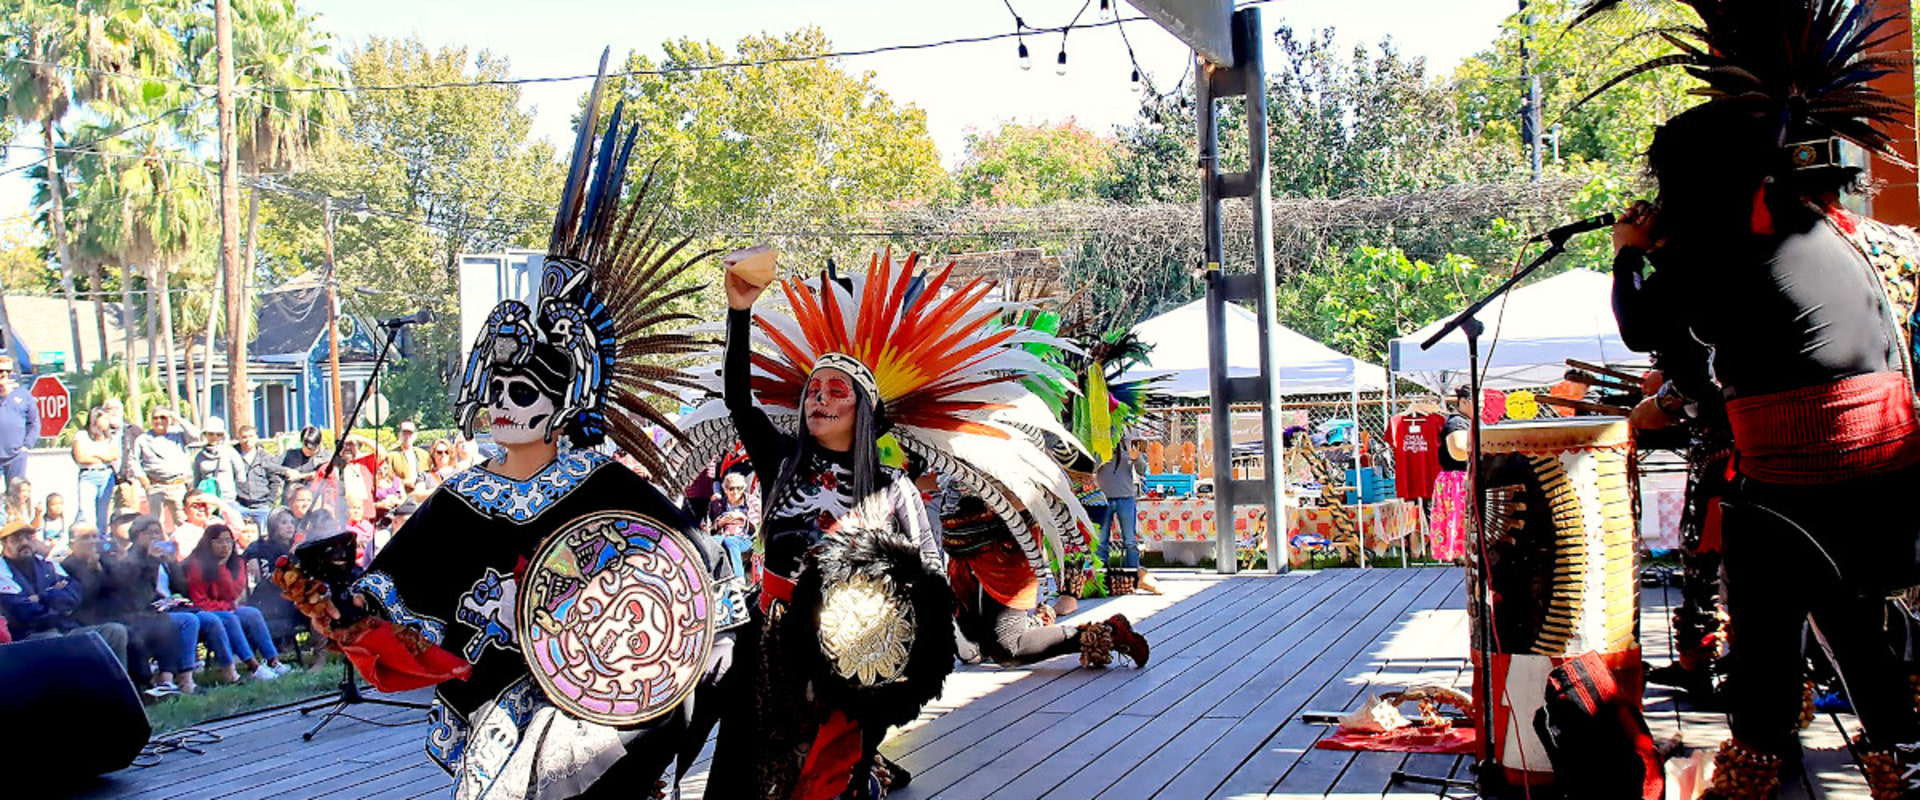 Festivals in Harris County, TX: A Guide to Celebrations and Traditions